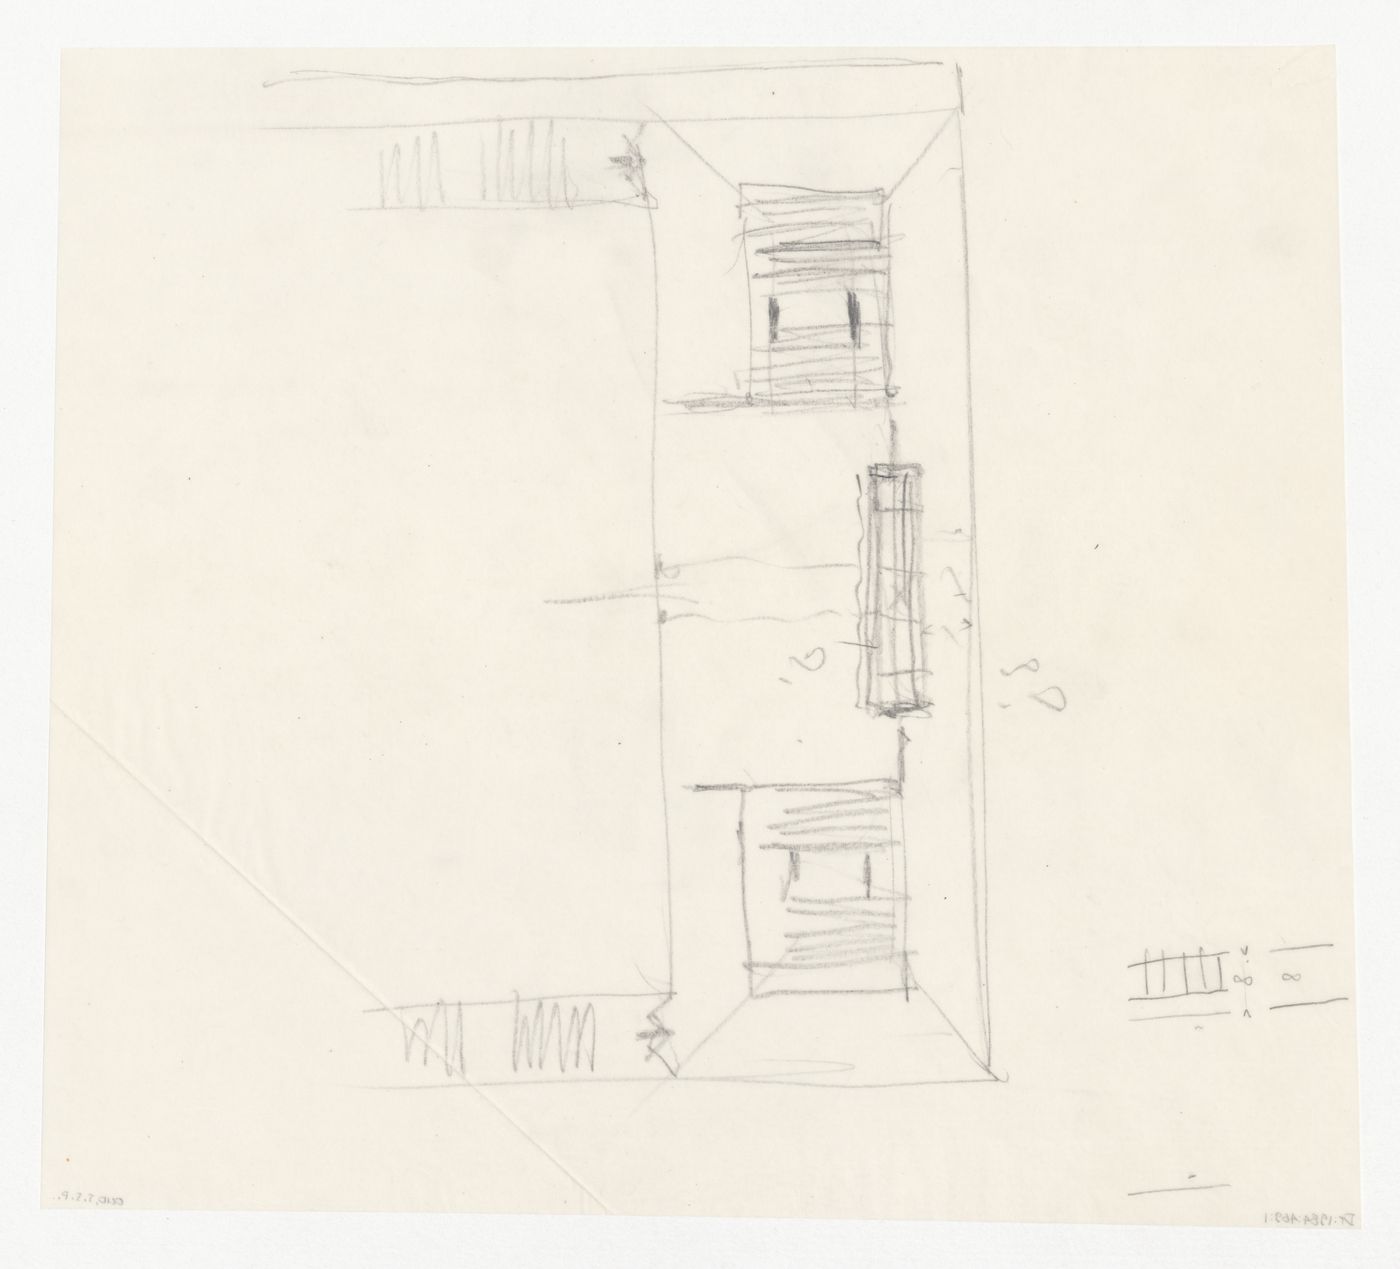 Sketch plan for the south pavilion for Congress Hall Complex showing a stair detail, The Hague, Netherlands